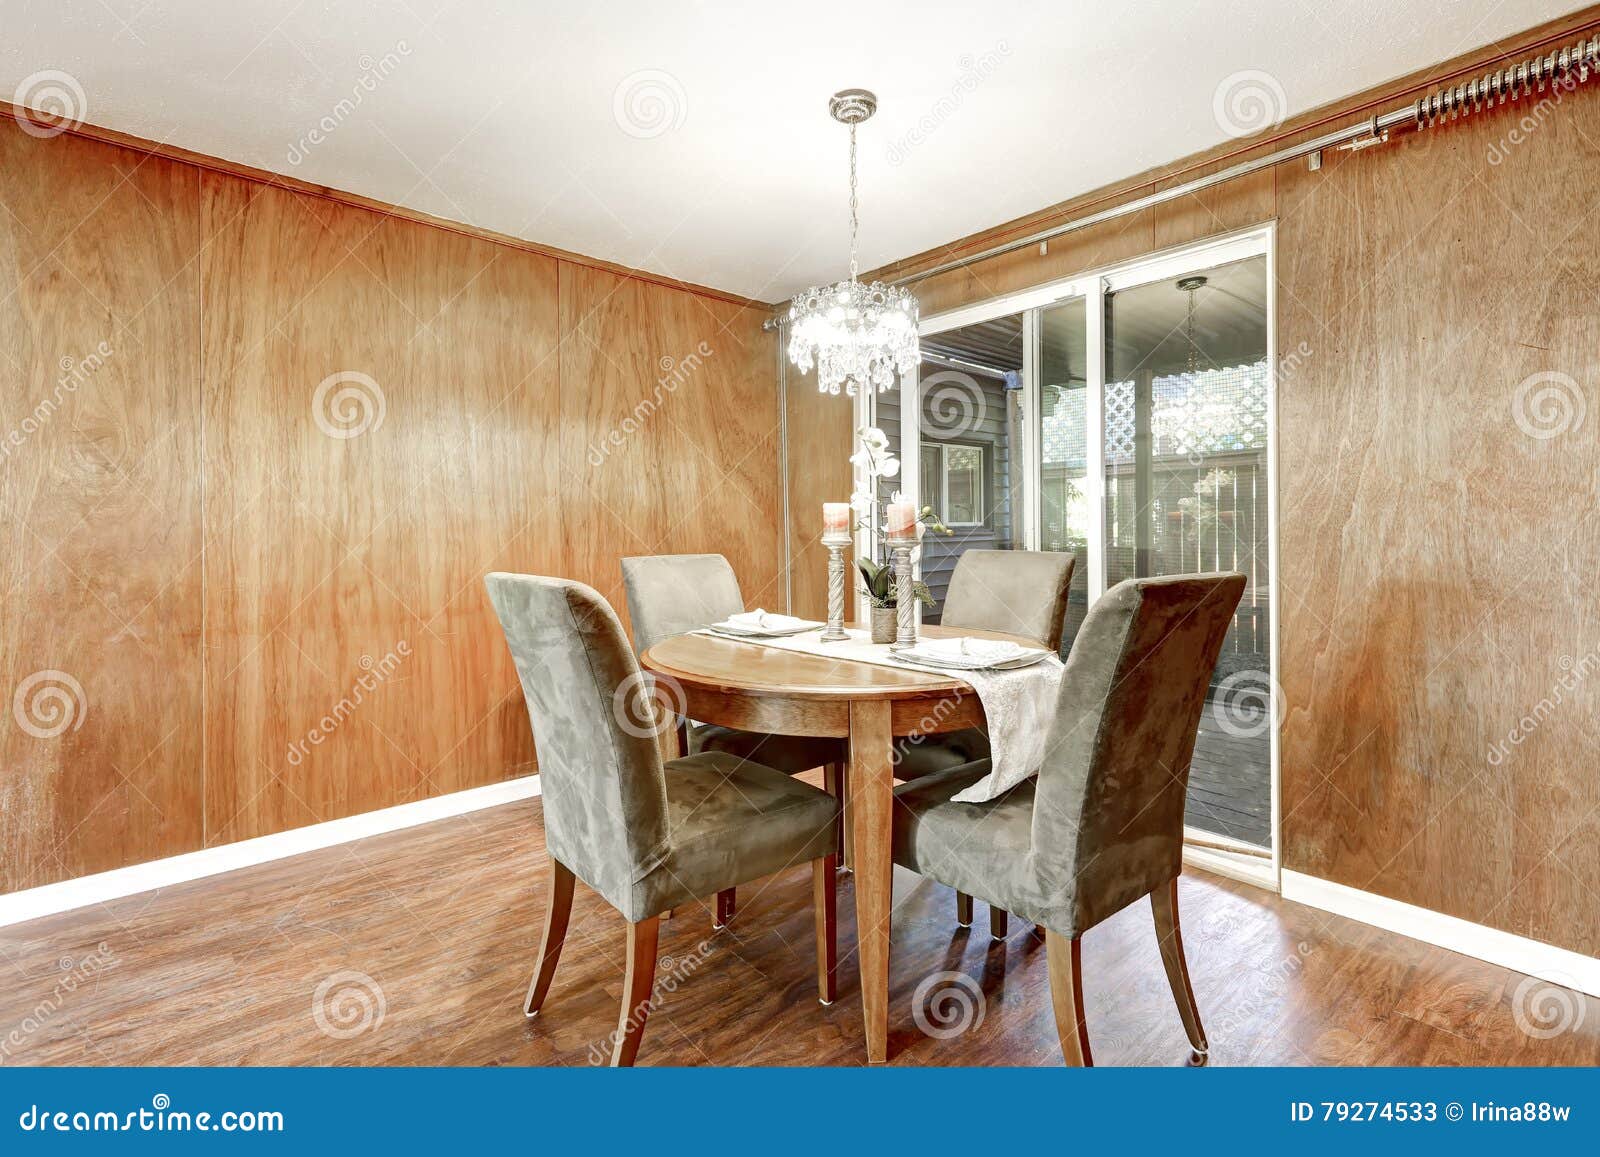 Wooden Interior Of Dining Room With Romantic Table Setting